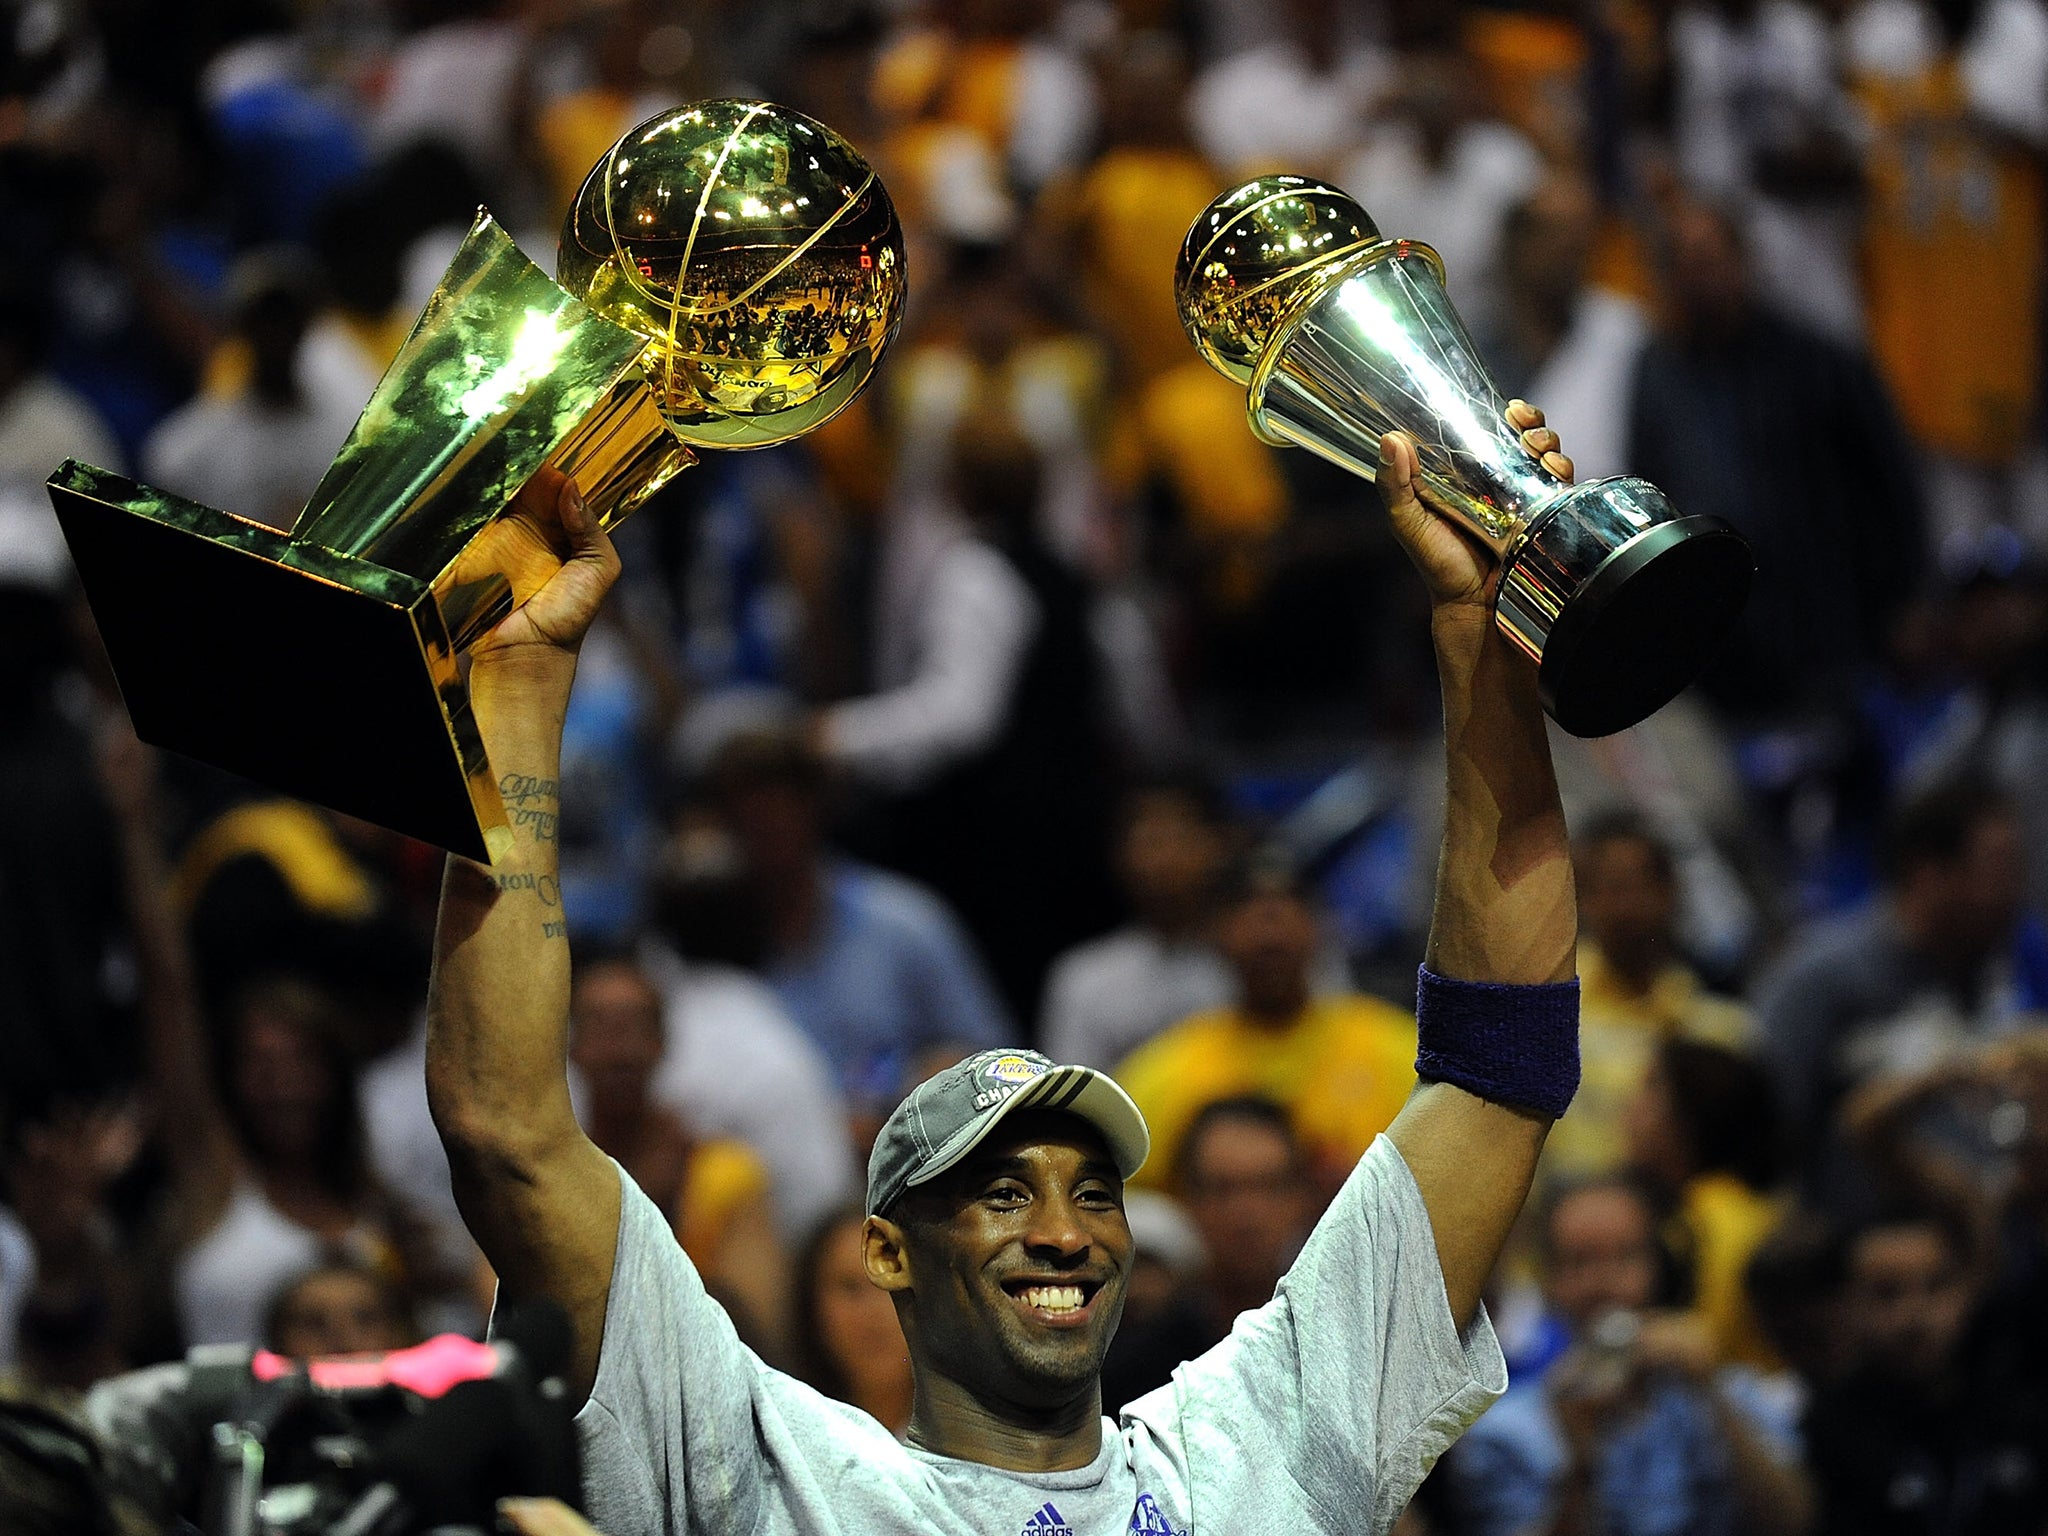 Bryant is a five-time NBA Champion and two-time Finals MVP